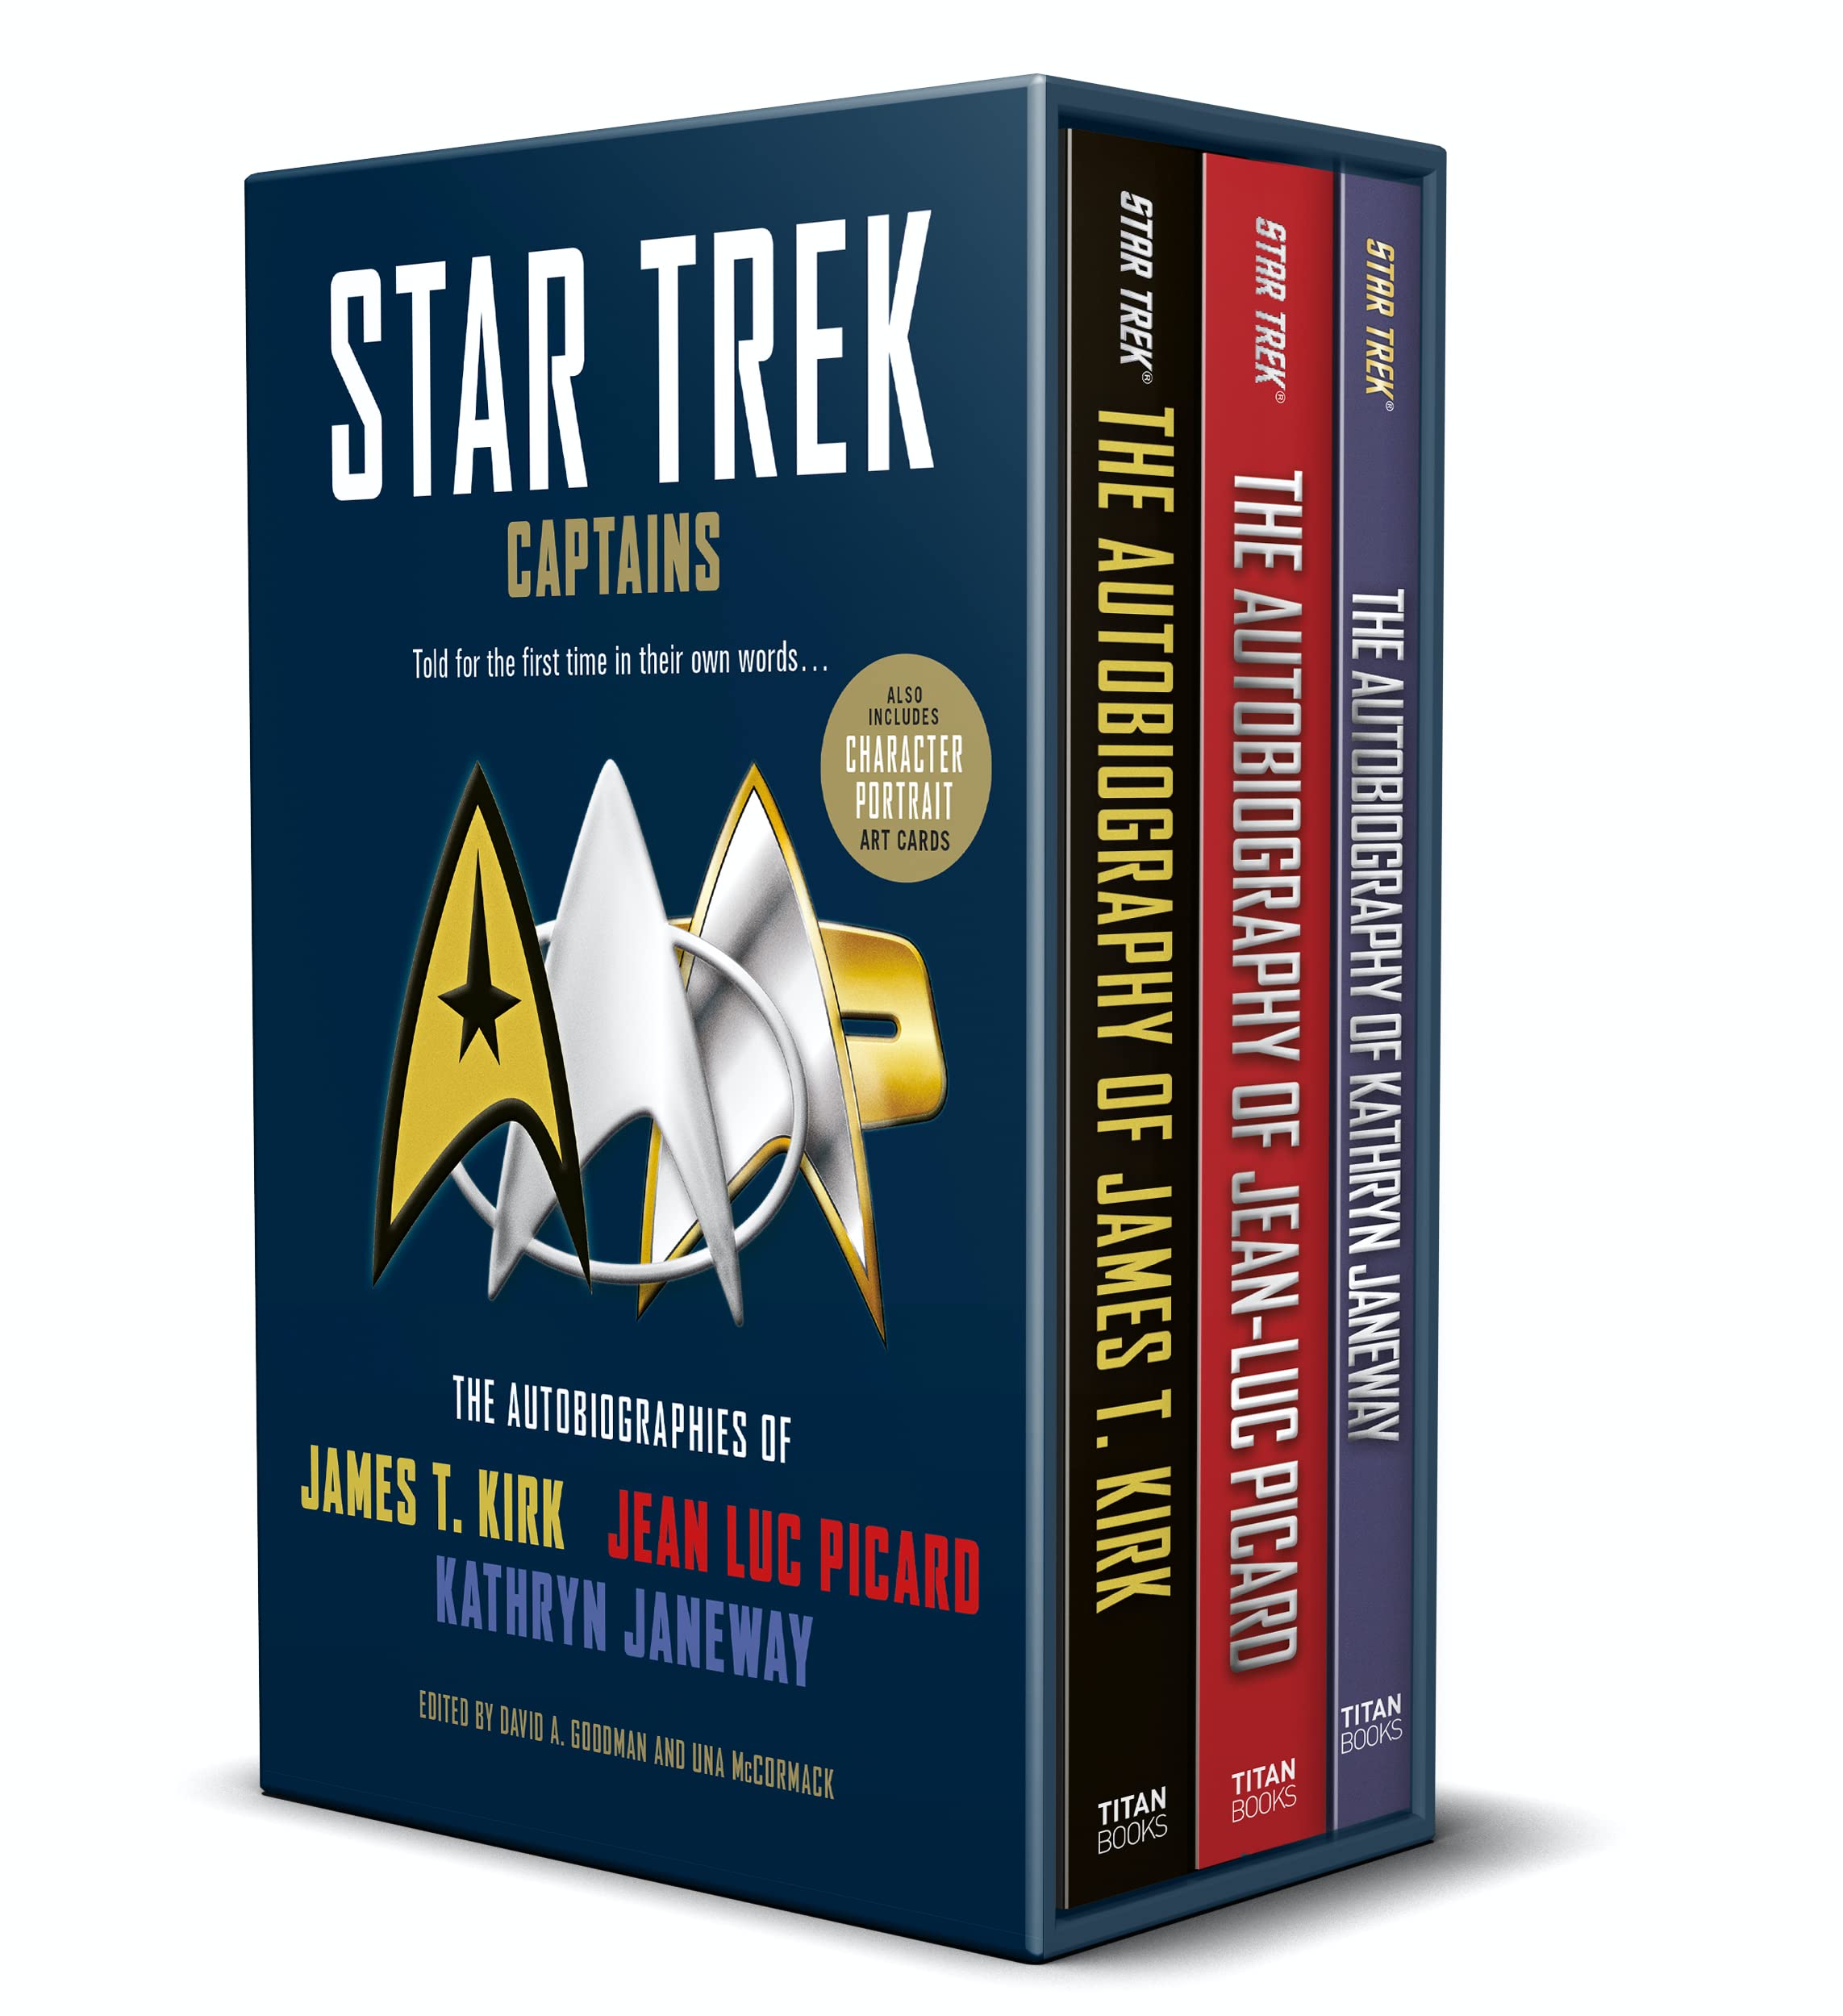 Star Trek Captains - The Autobiographies Boxed Set with Slipcase and Character Portrait Art of Kirk, Picard and Janeway Autobiographies - SureShot Books